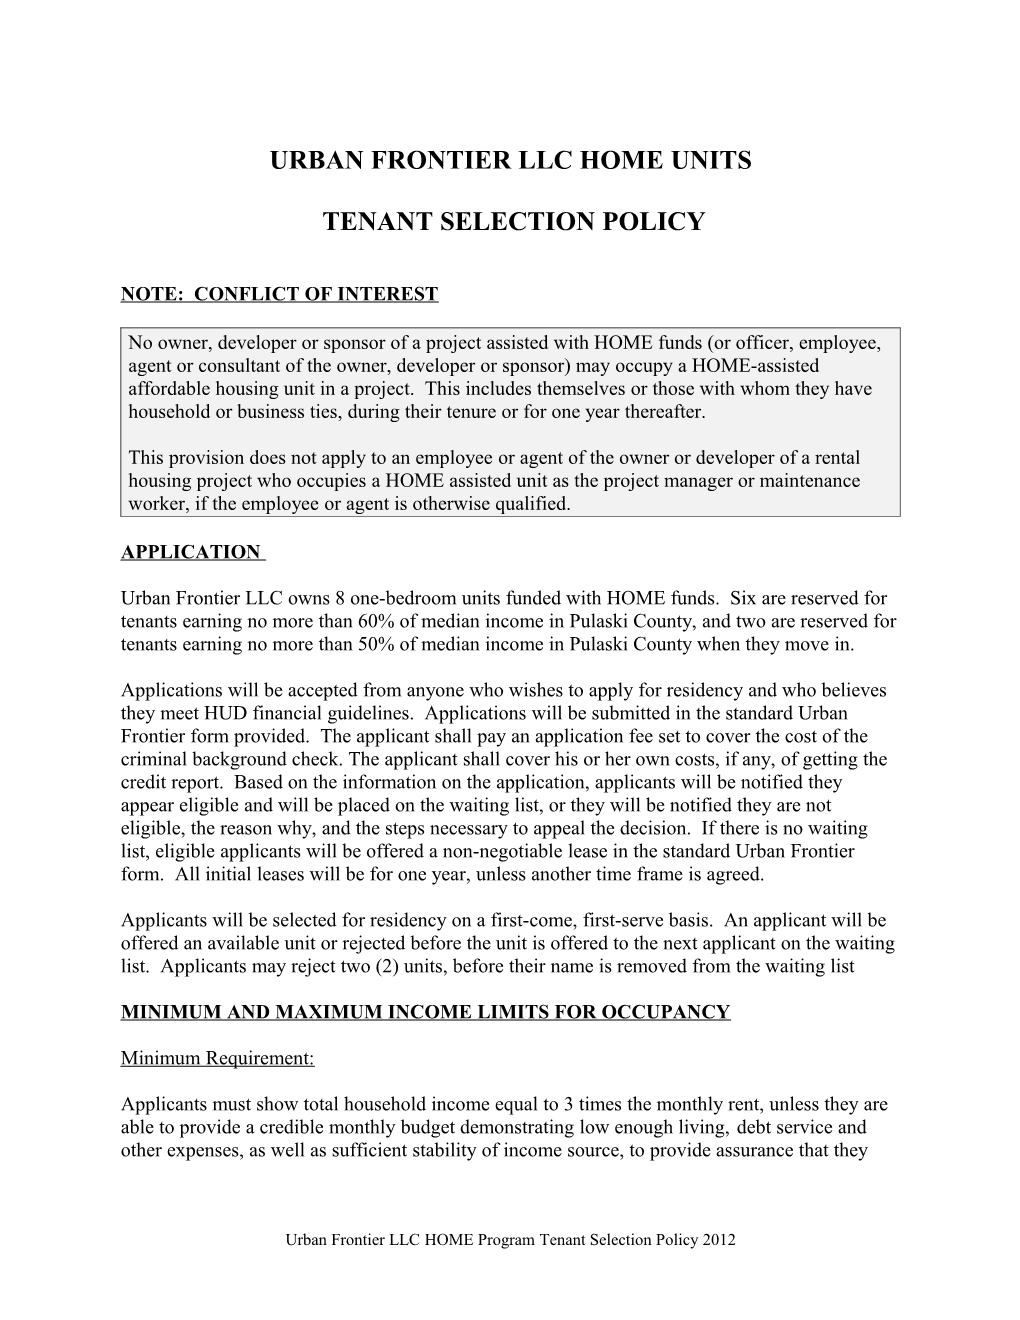 Sample Tenant Selection Policy